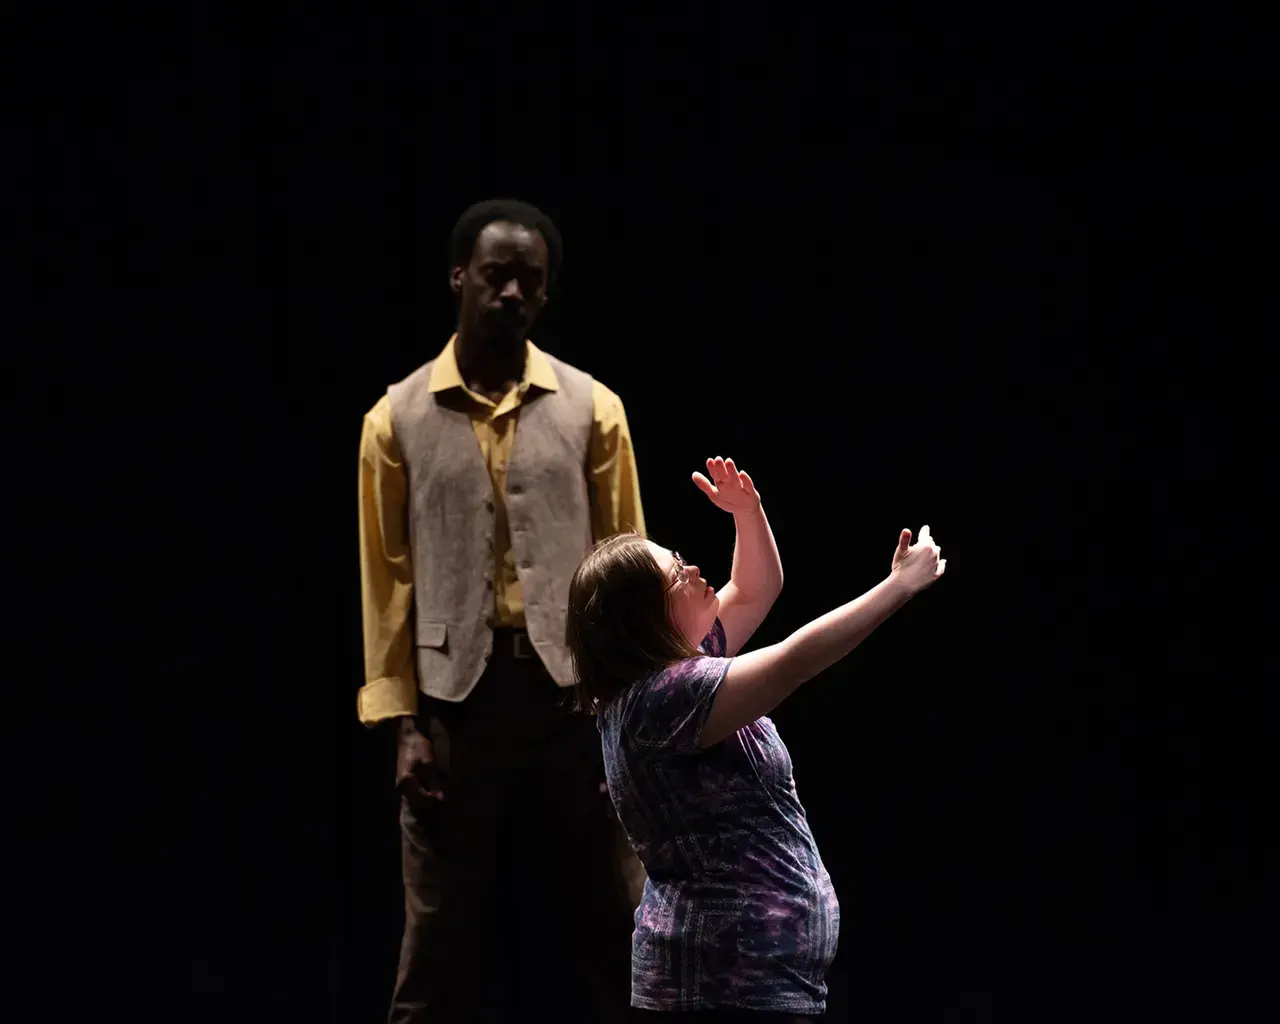 A Fierce Kind of Love, Suli Holum, March 2019, Institute on Disabilities at Temple University, FringeArts, High Pressure Fire Service Festival. Photo by Johanna Austin, AustinArt Photography.